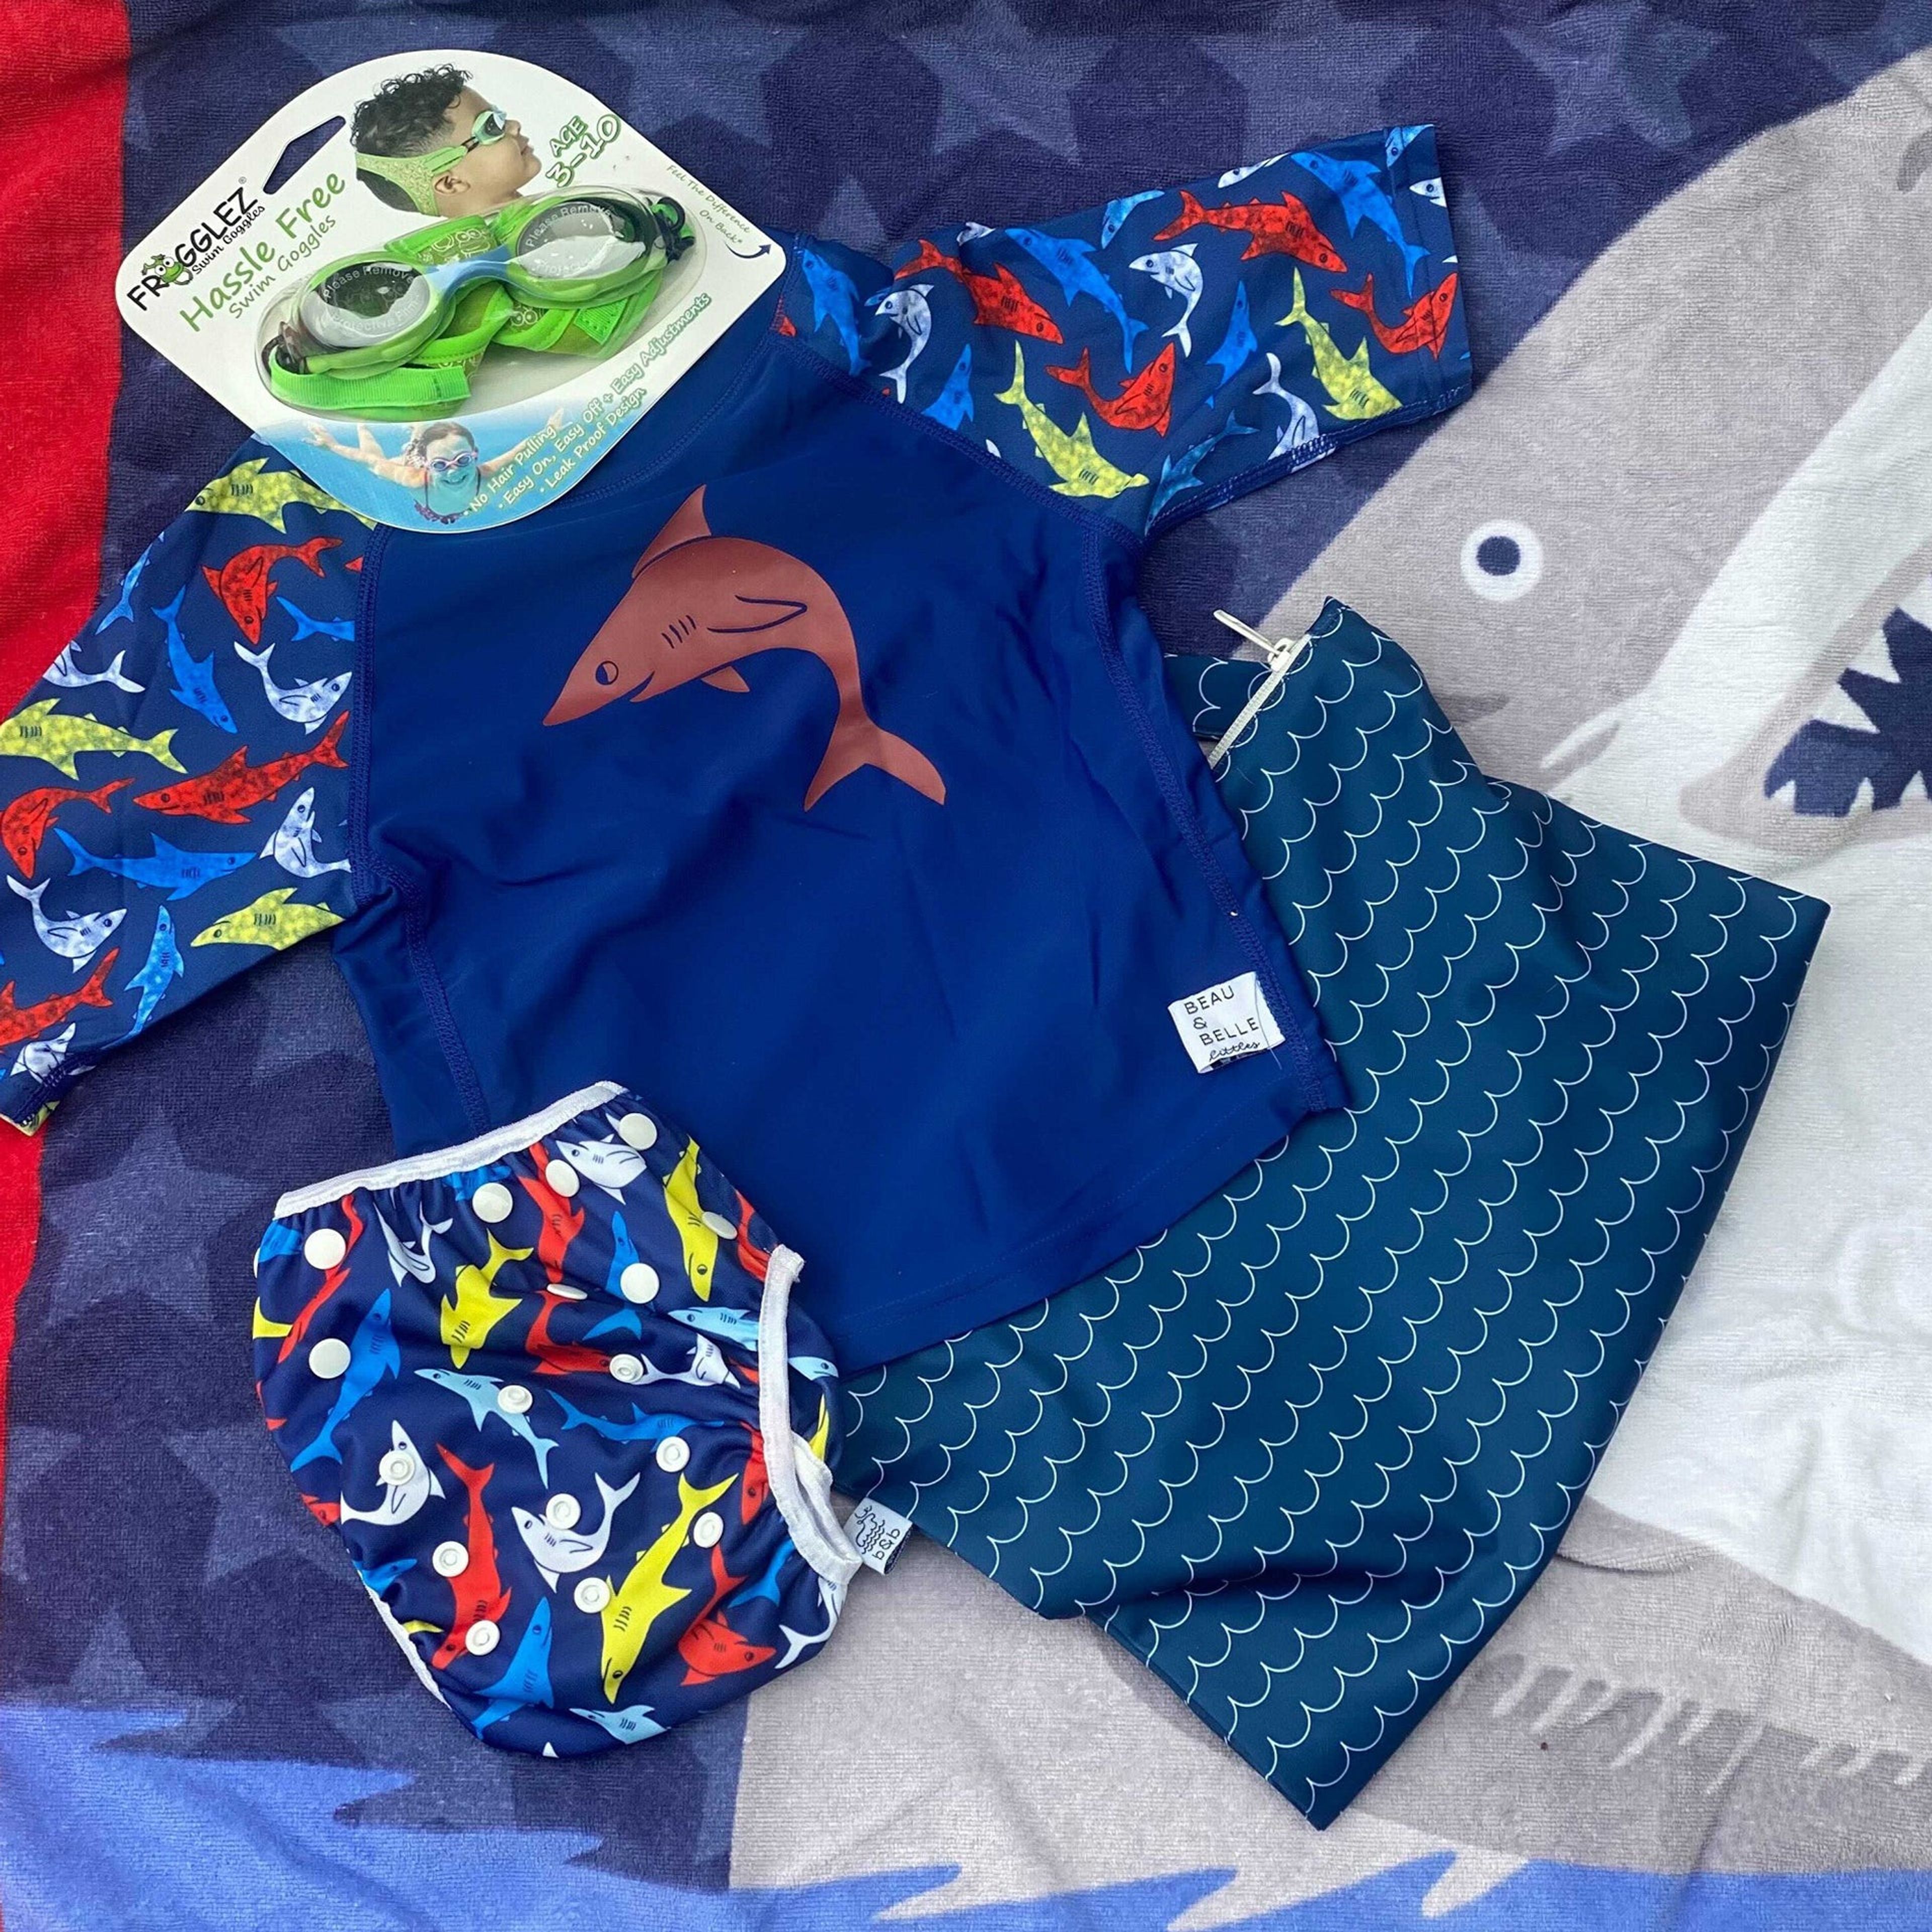 Swim Starter Kit for Babies and Toddlers